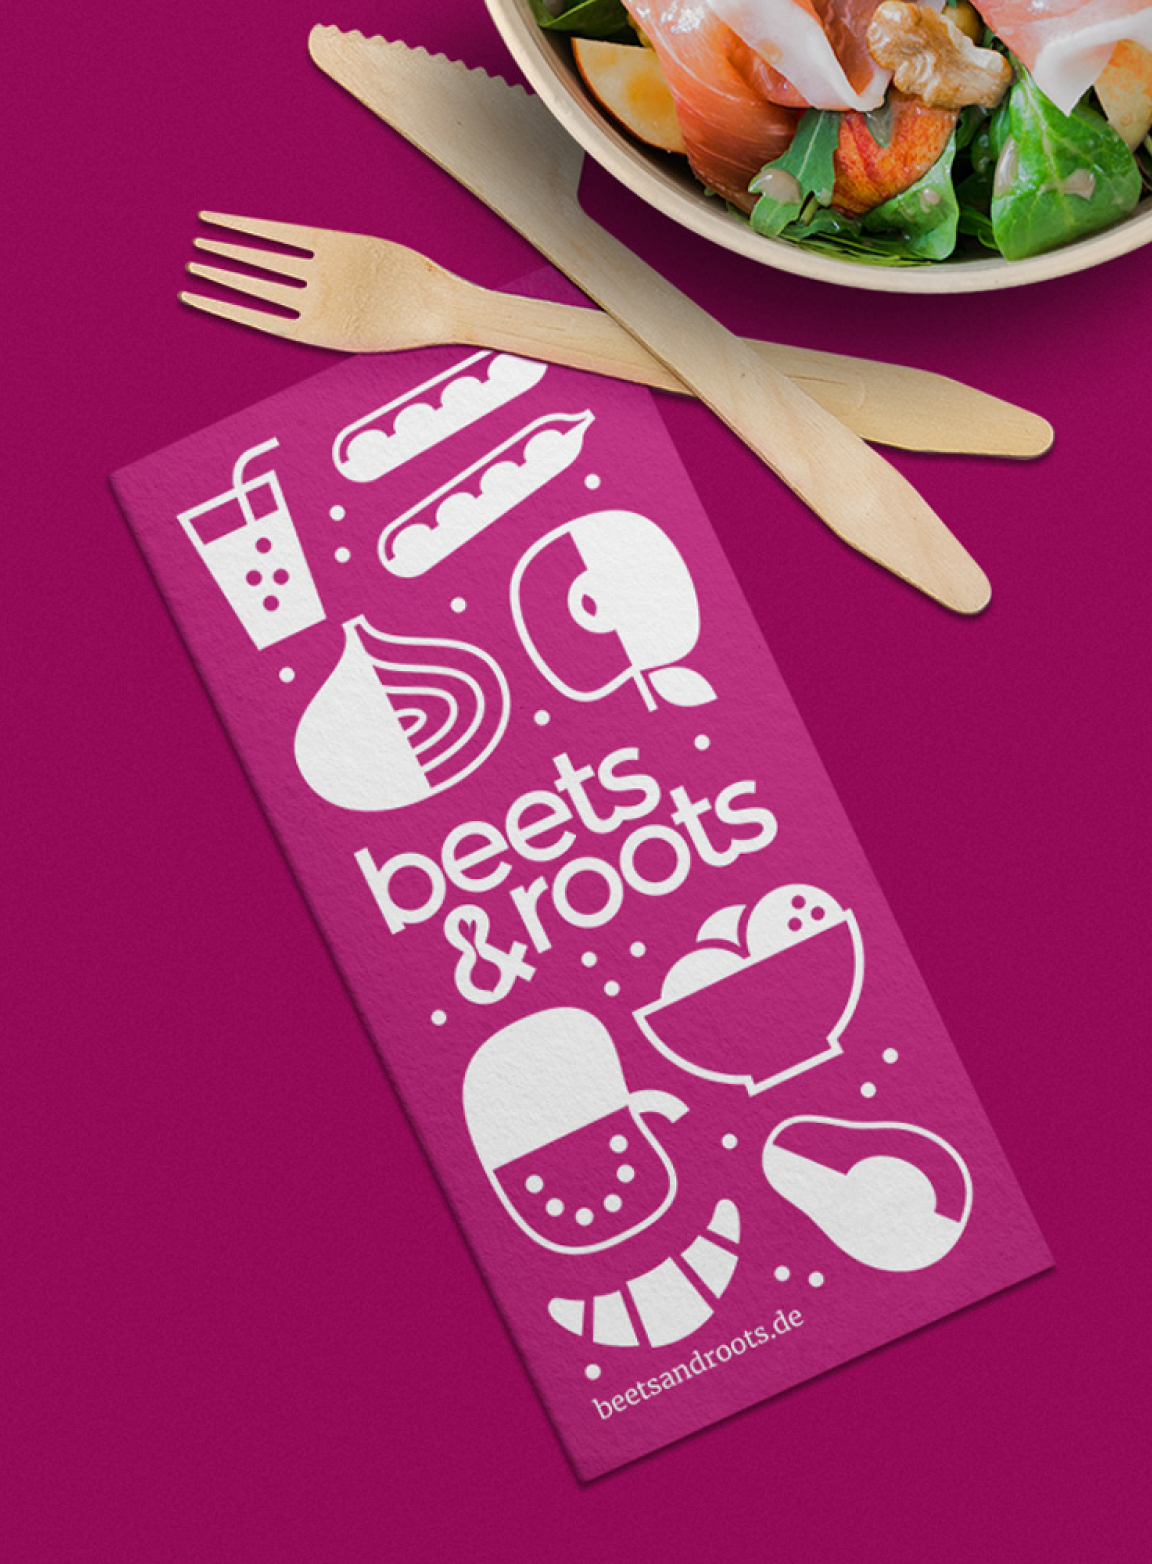 studio nunc beets&roots case photo of flyer and bowl